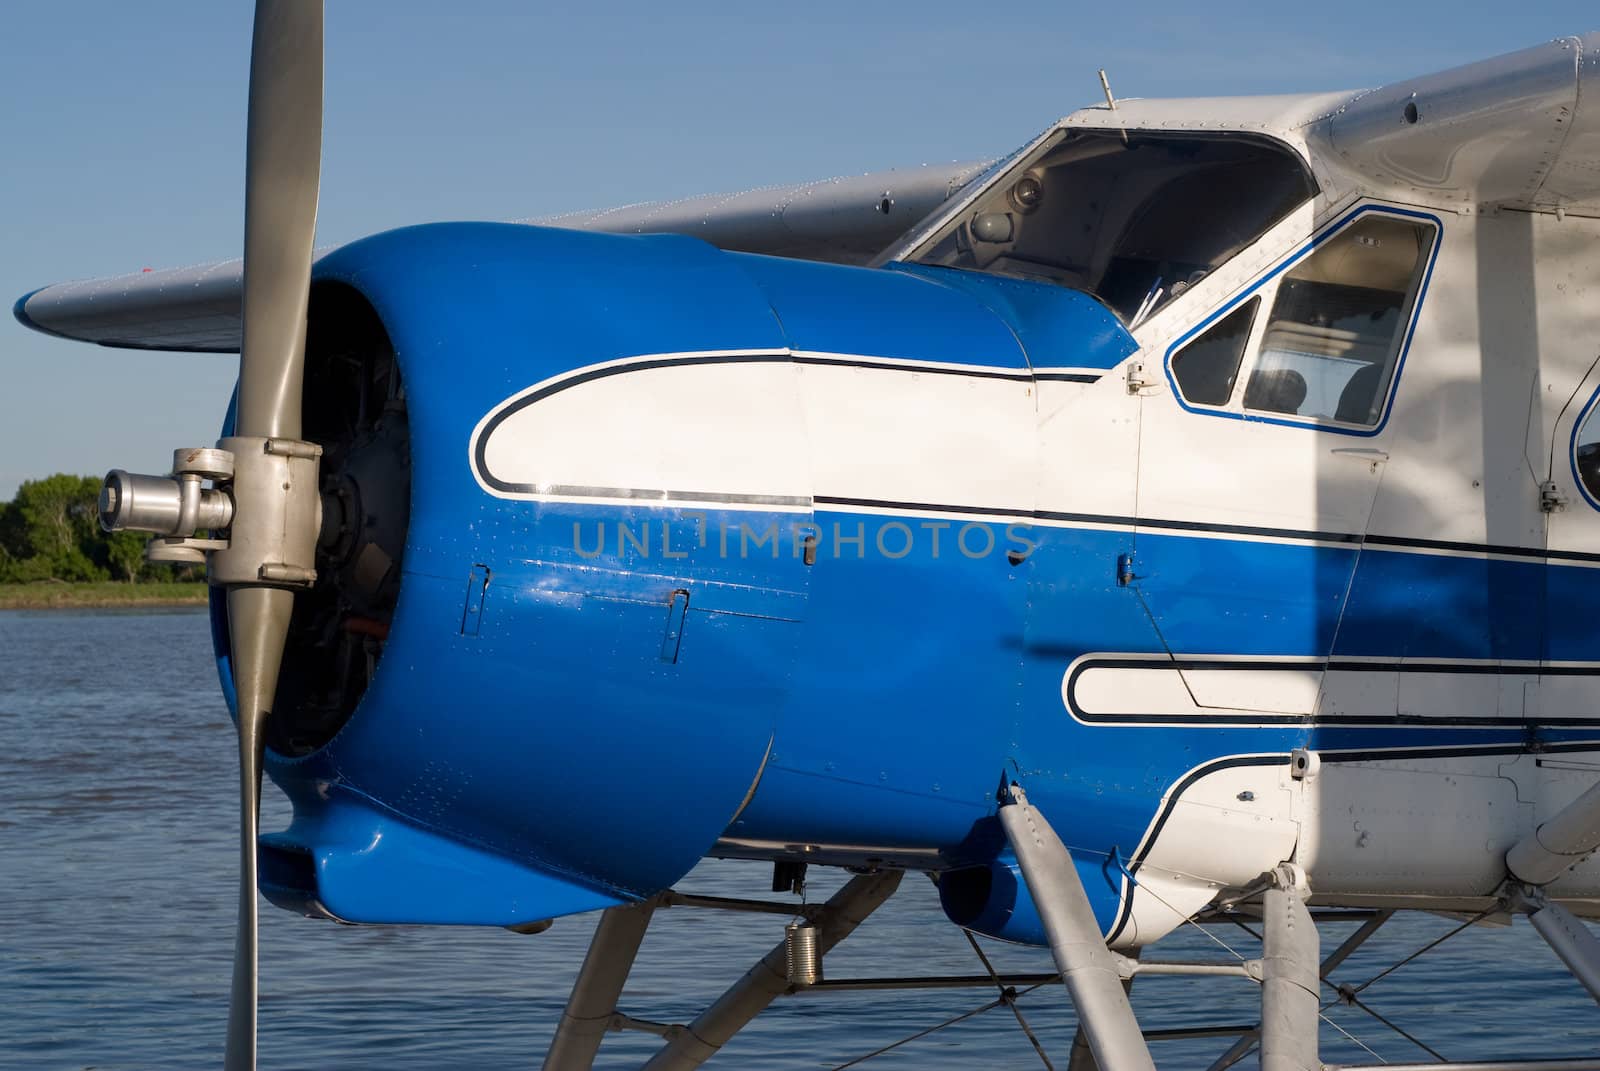 Close-up view of the front of a small plane